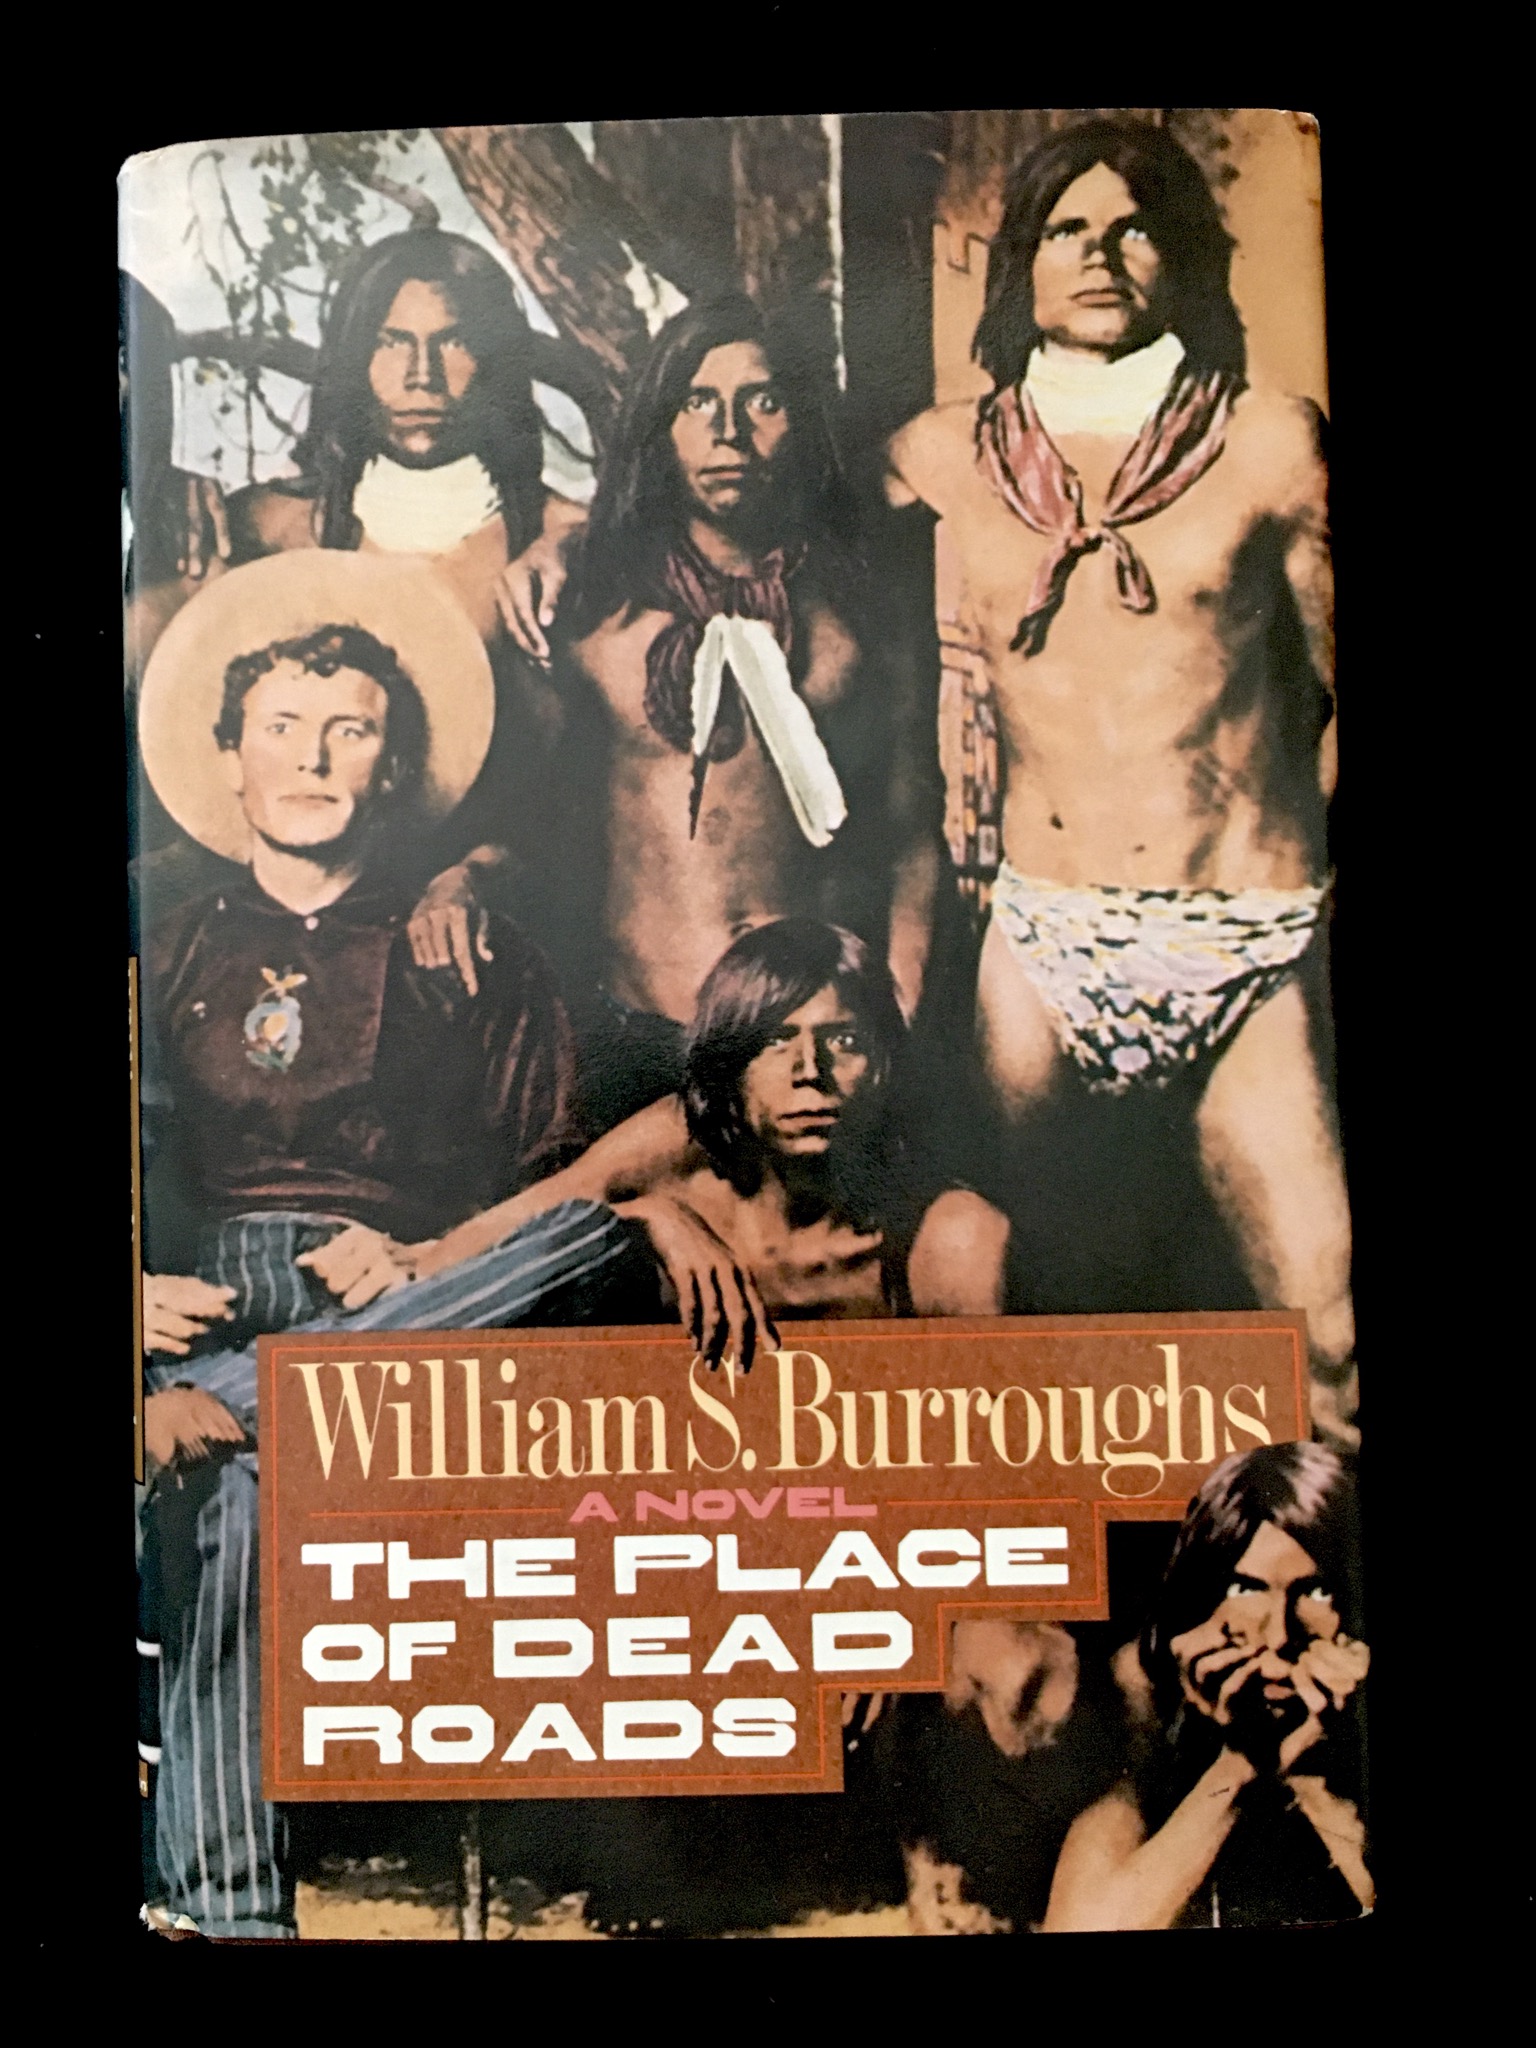 The Place of Dead Roads by William Burroughs